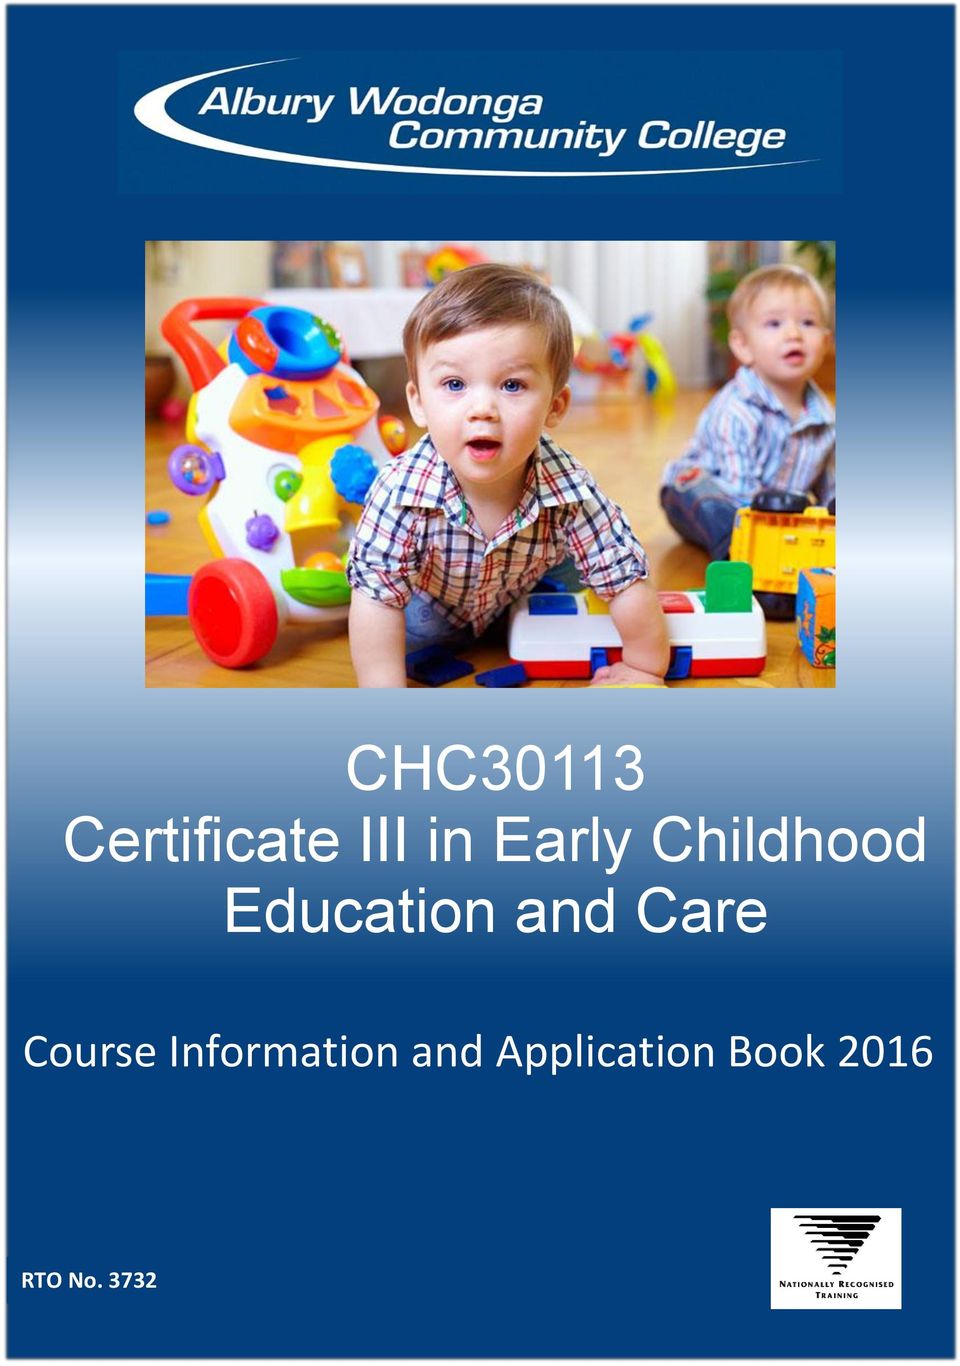 Care Course Information and